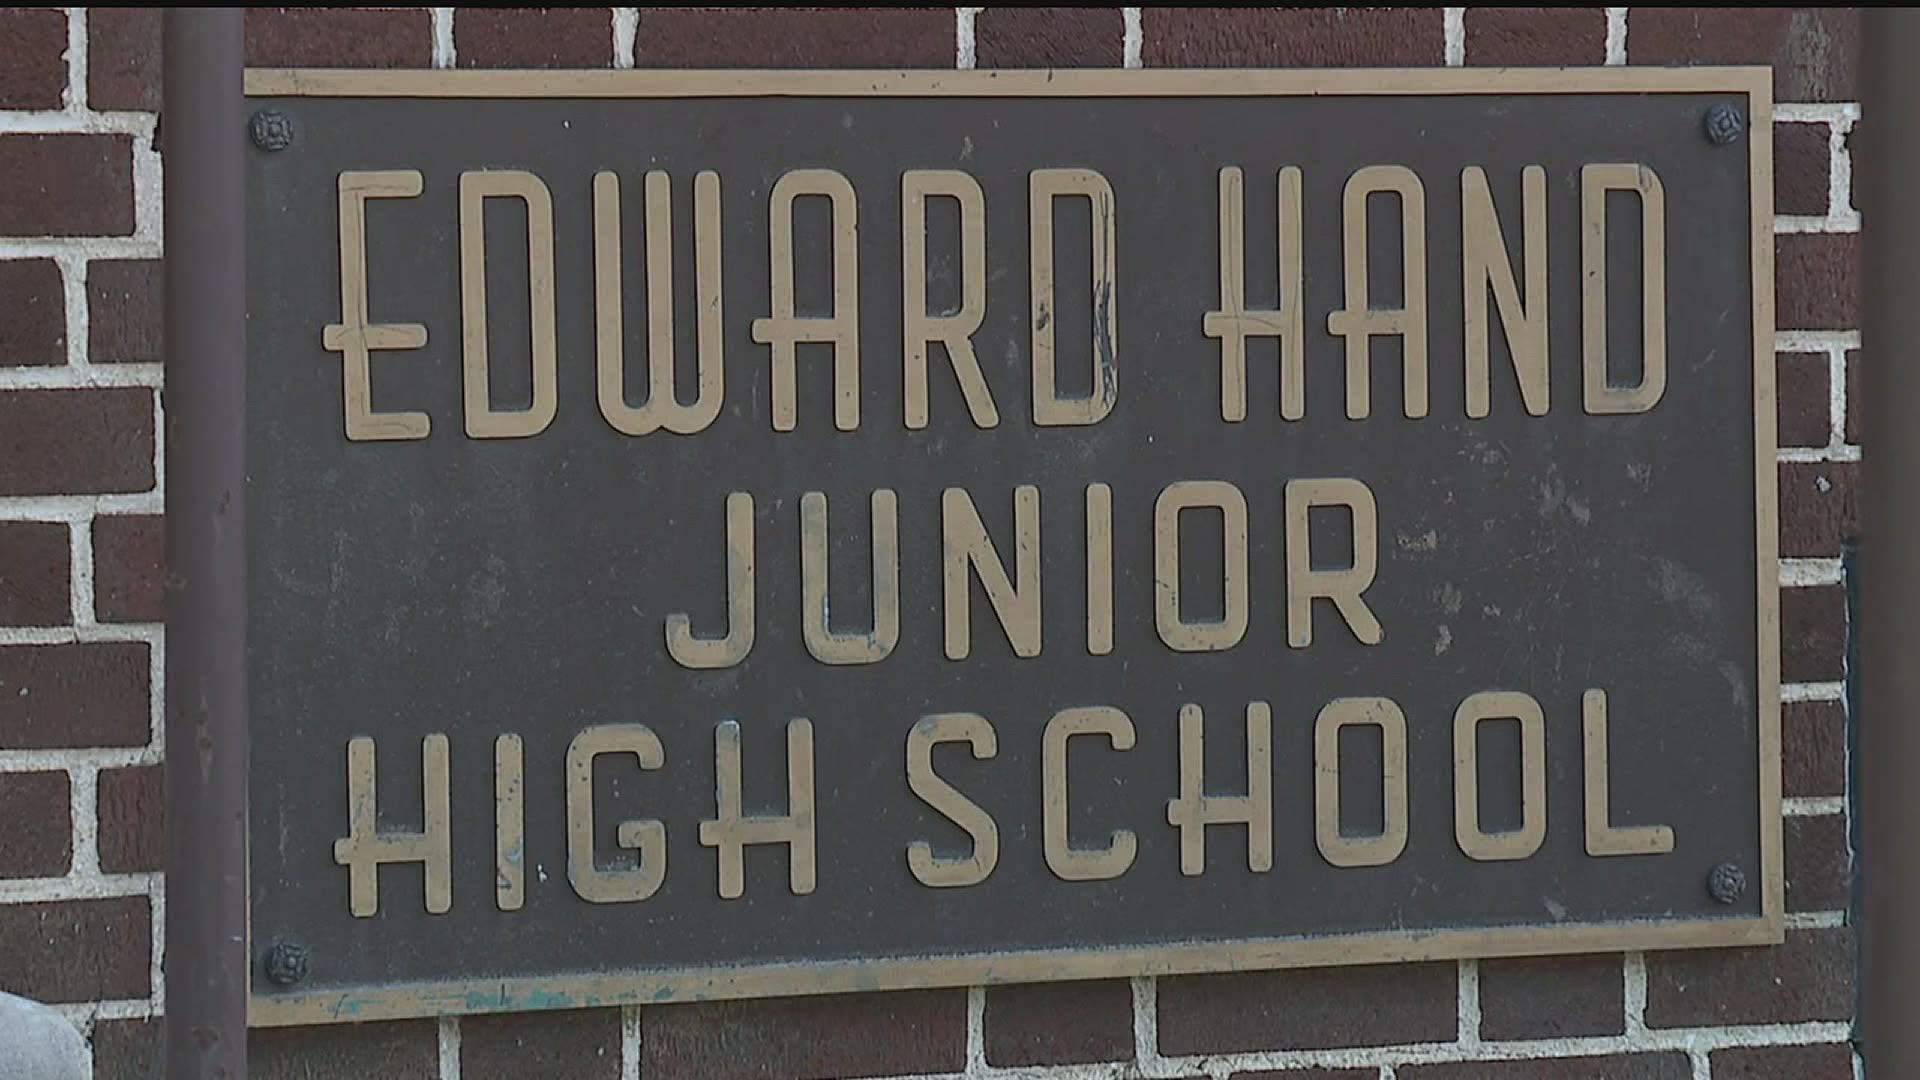 Edward Hand Middle School is currently named after a Revolutionary War general who owned a plantation in Lancaster County.